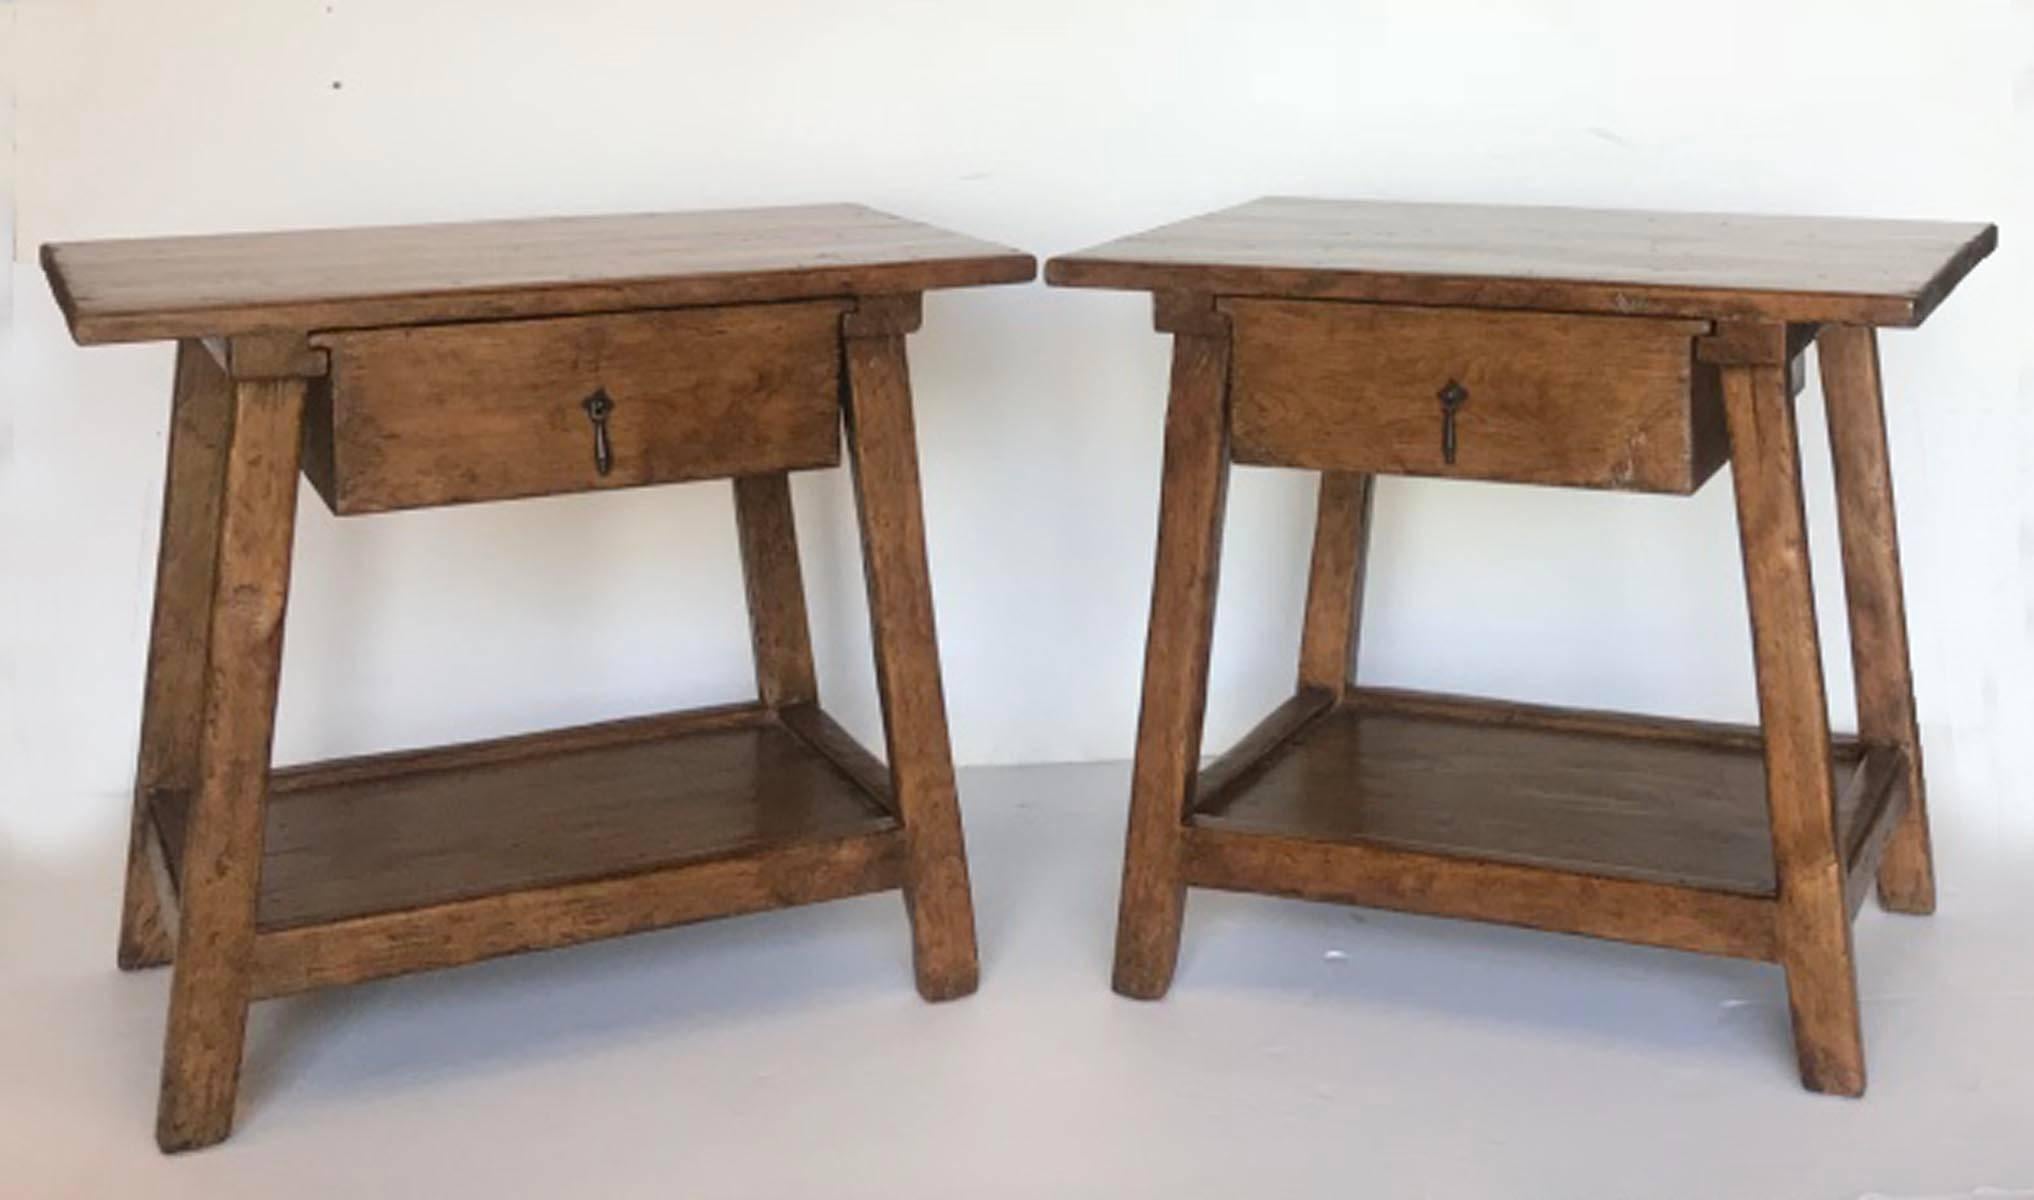 Custom side tables or nightstands with drawer and shelf. Can be made in custom sizes and finishes. As shown, in Alder wood with a Walnut #1 finish and heavy distress. Made in Los Angeles by Dos Gallos Studio. CUSTOM PRICES ARE SUBJECT TO CHANGE.